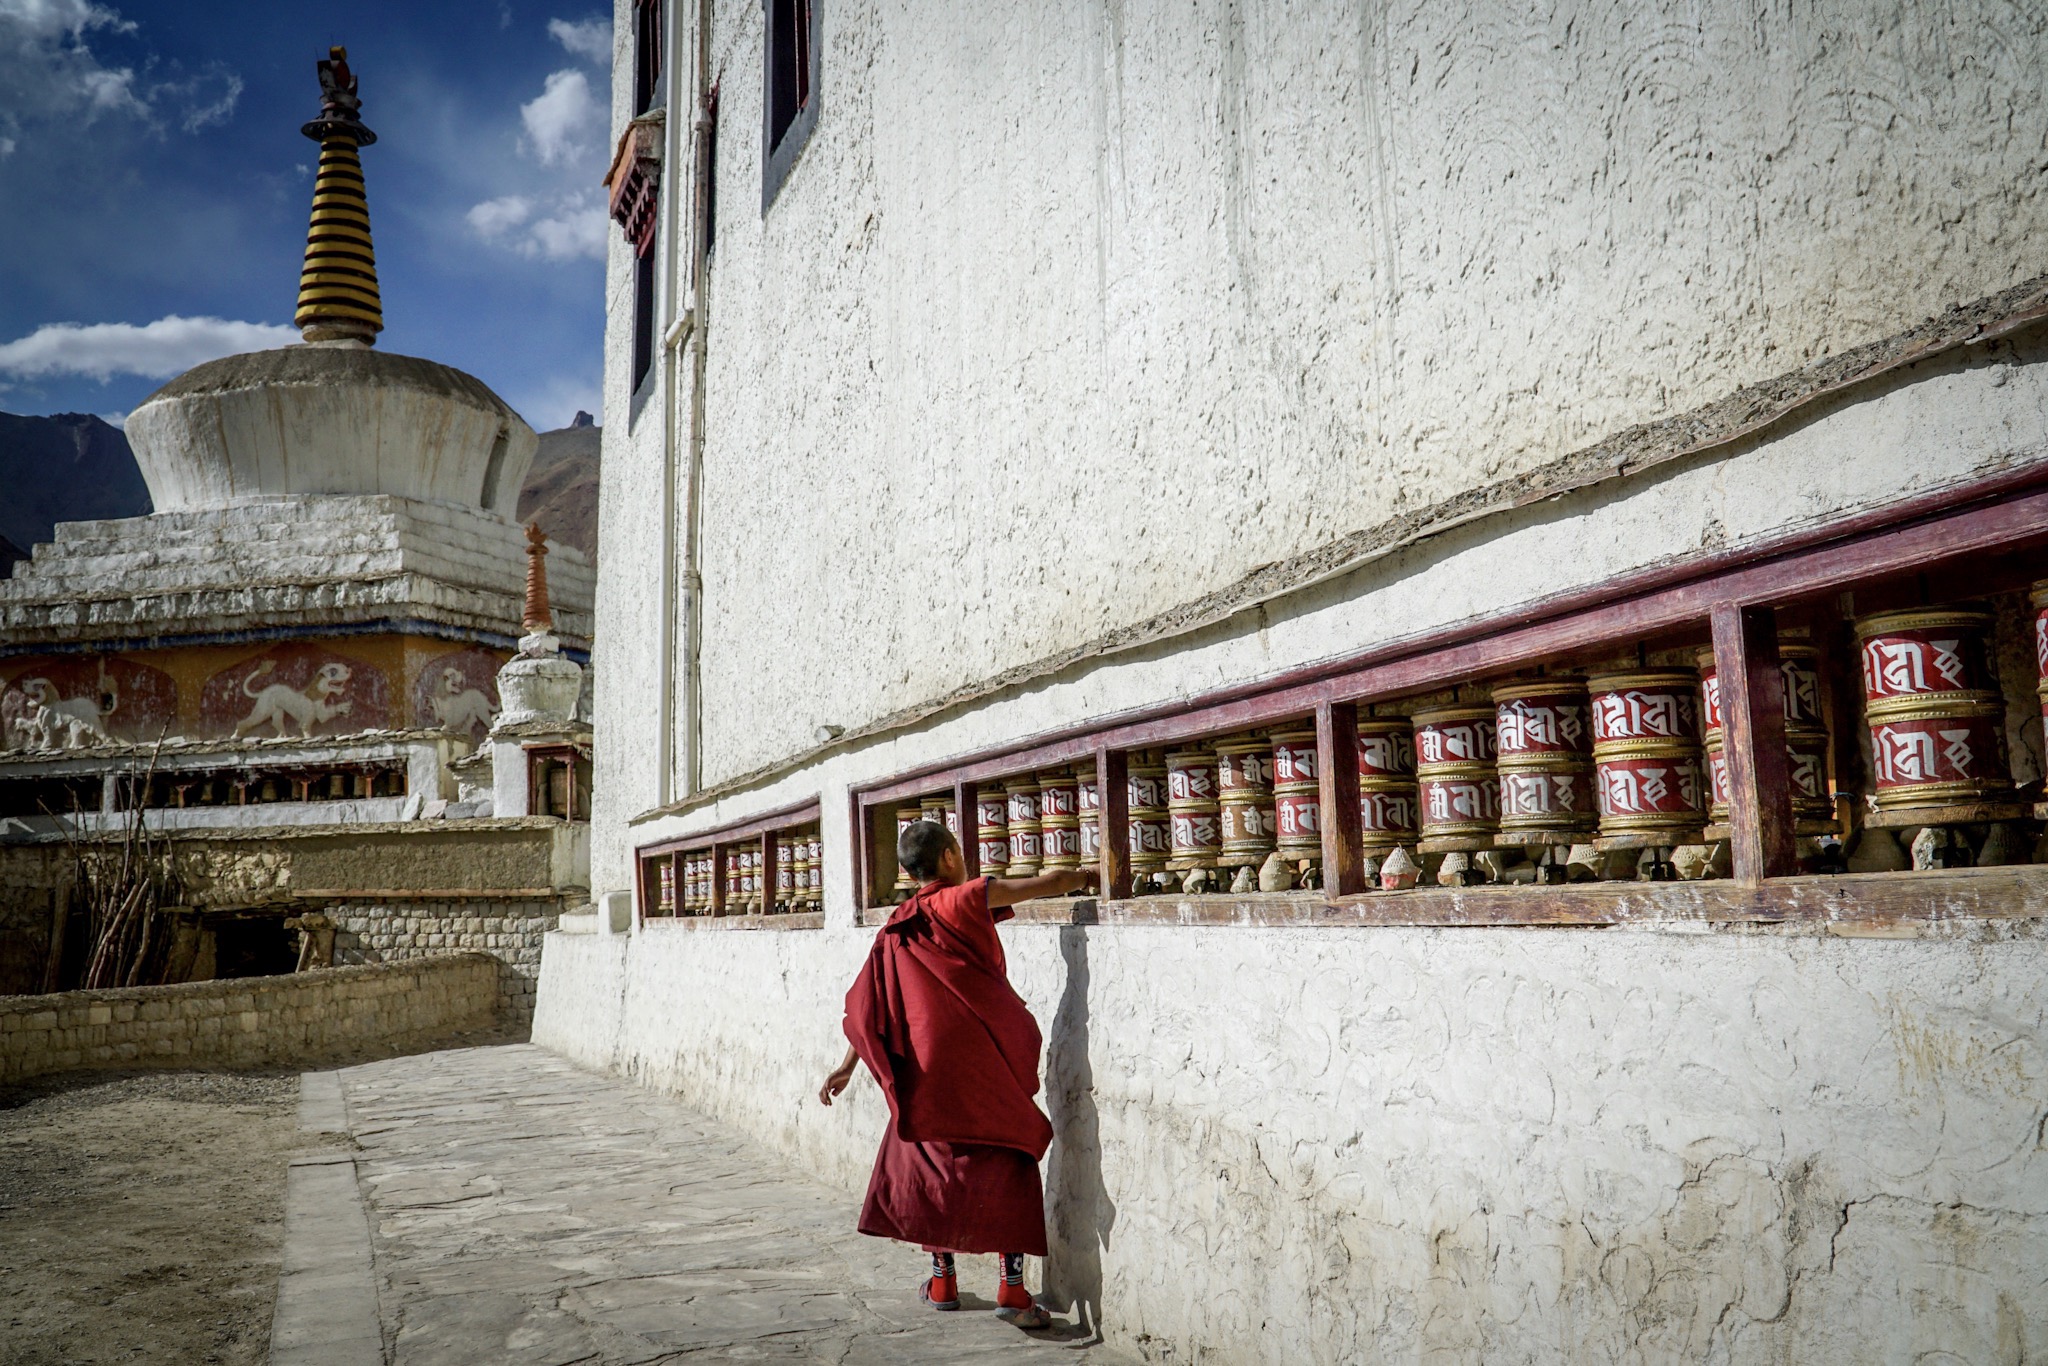 The prayer wheels must still be turned clockwise daily as per training.